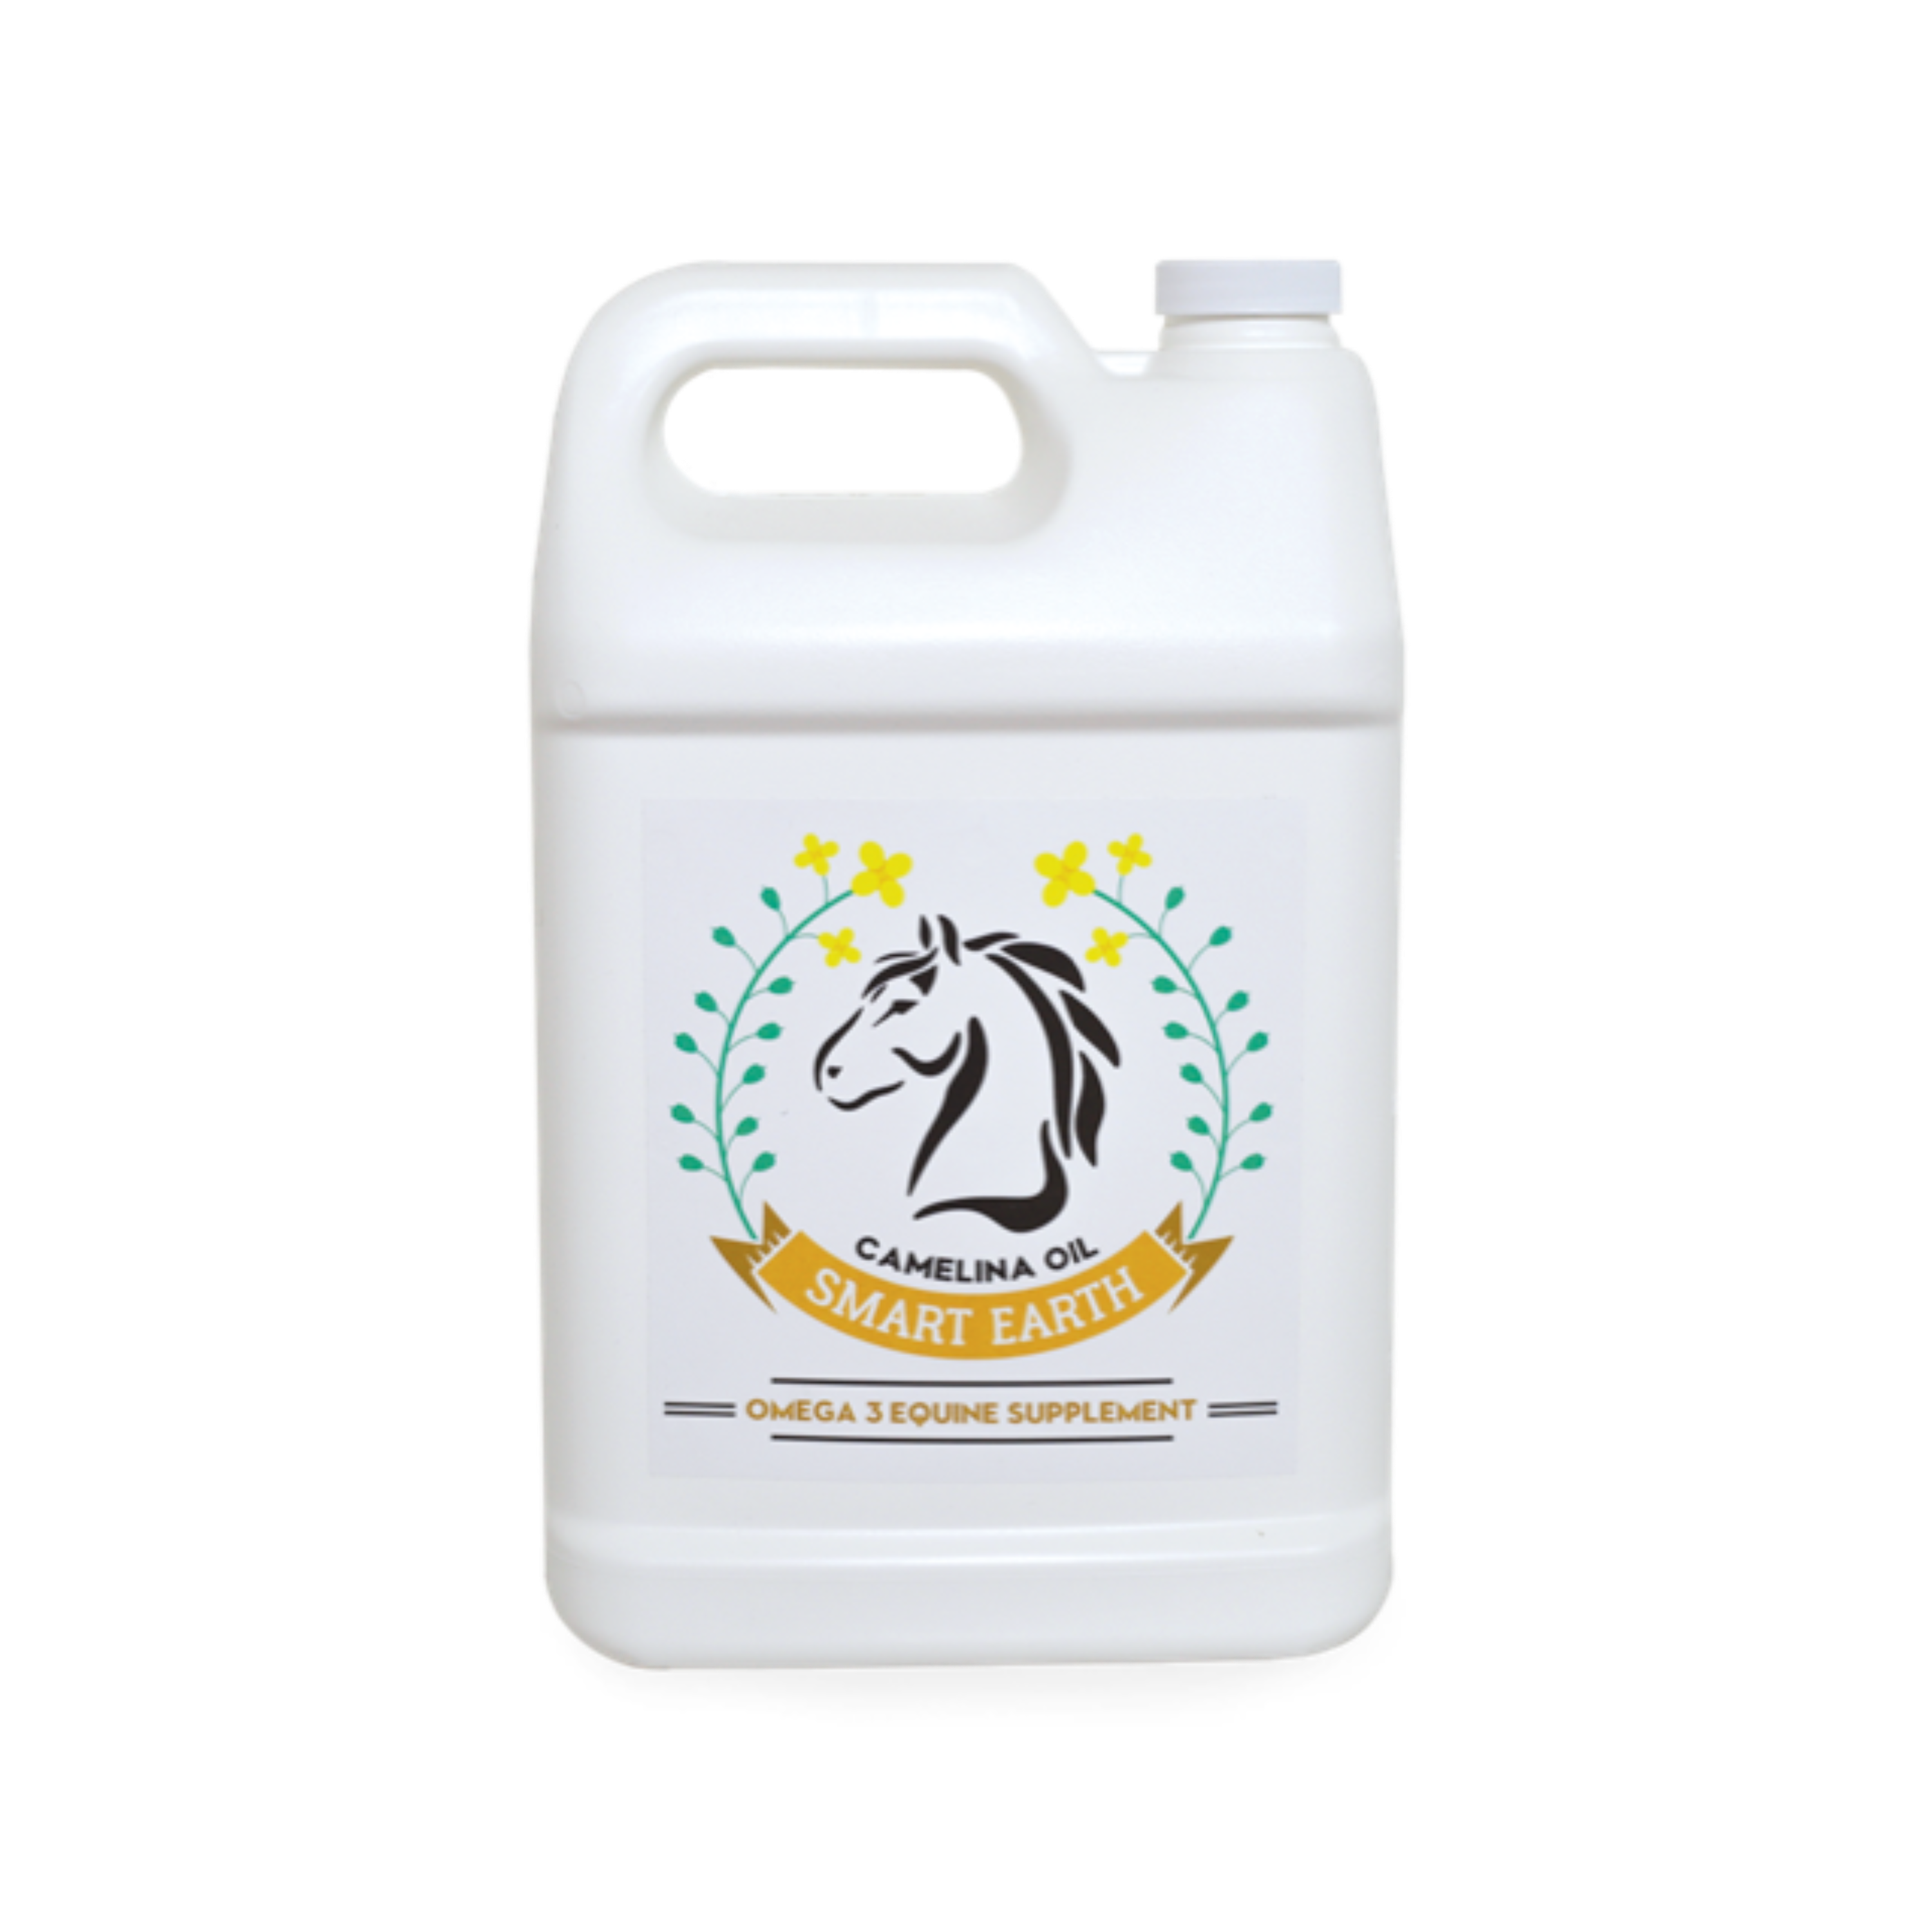 Flaxseed oil for horses - Effects, application & dosage